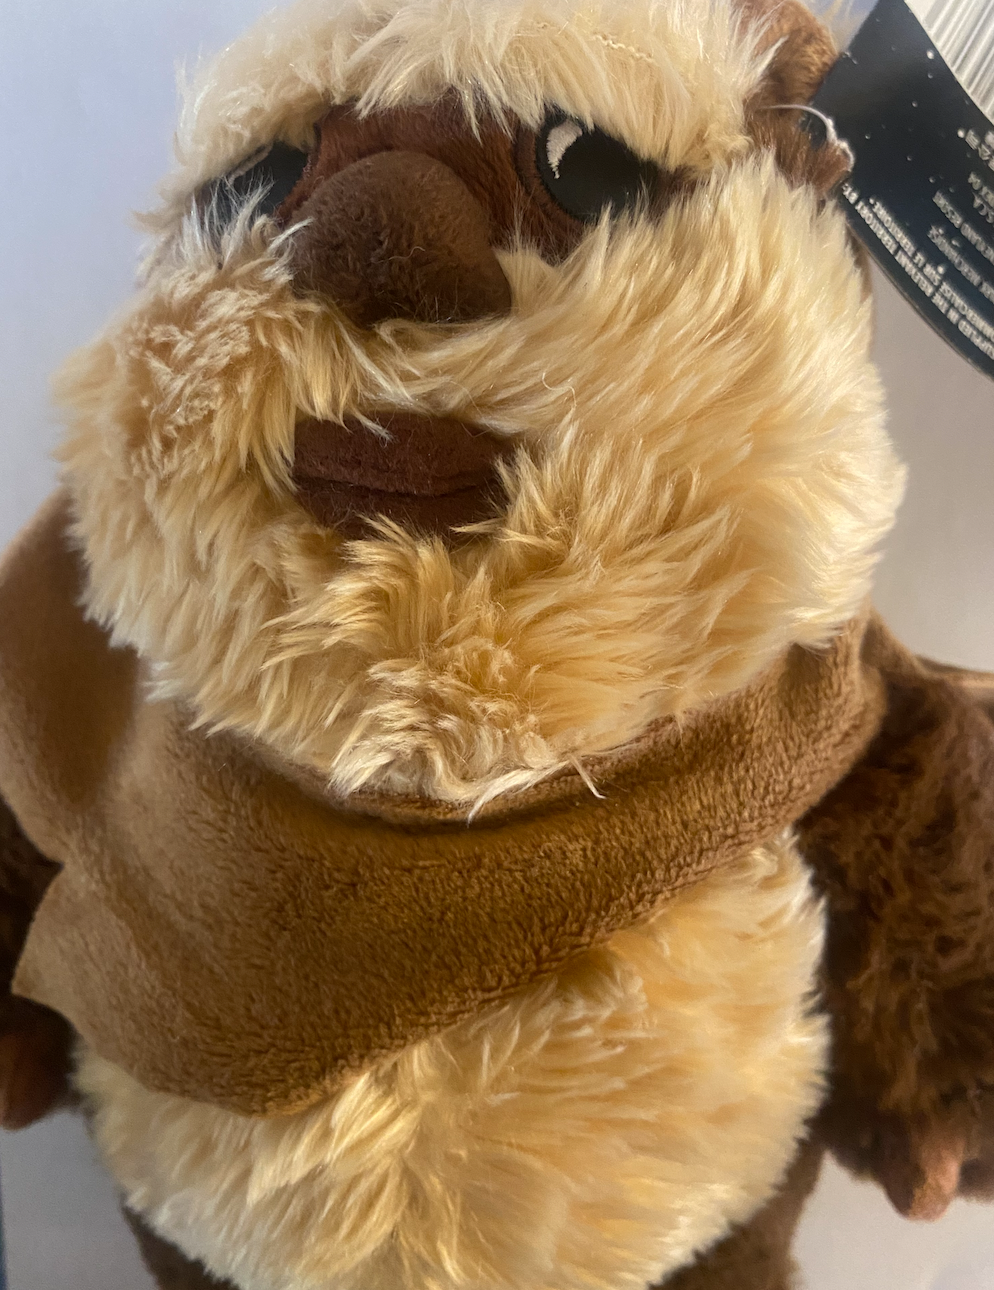 Disney Parks Star Wars Wicket Ewok 9in Plush New with Tags